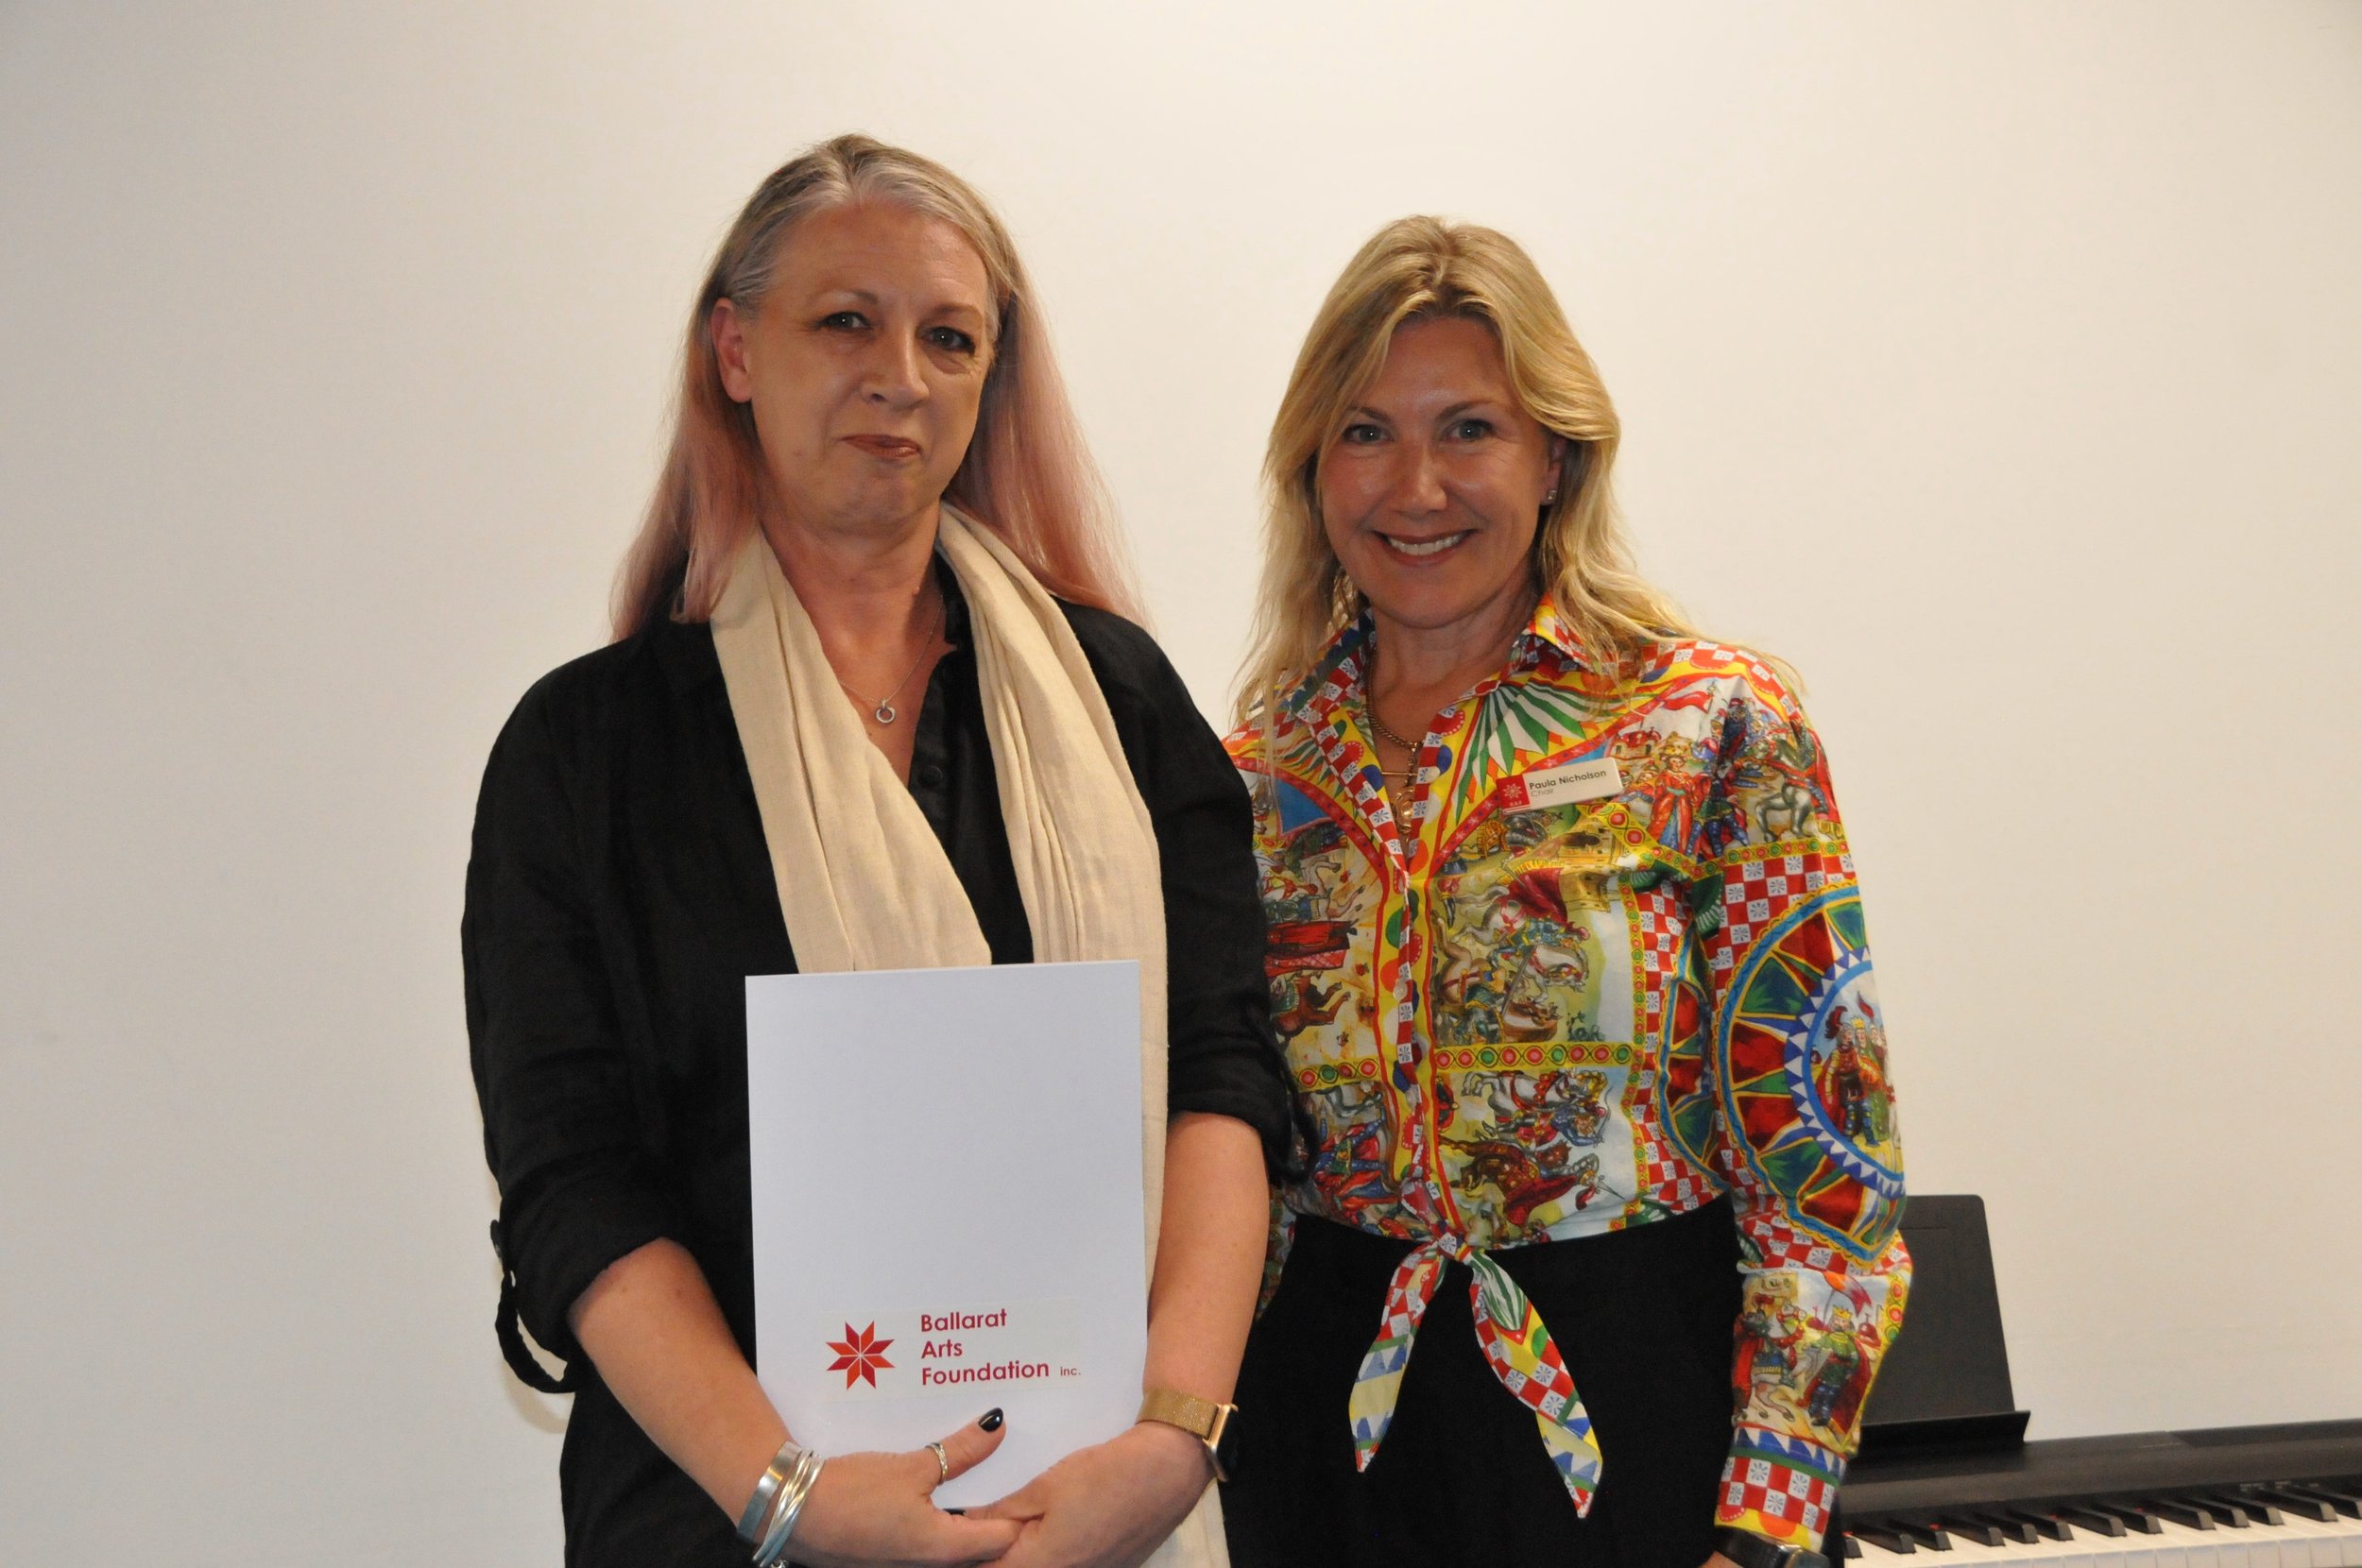 Kelly Chivers receiving the Isobella Foundation Award on behalf of her daughter Charlotte Chivers, with Paula Nicholson representing the donor.jpeg